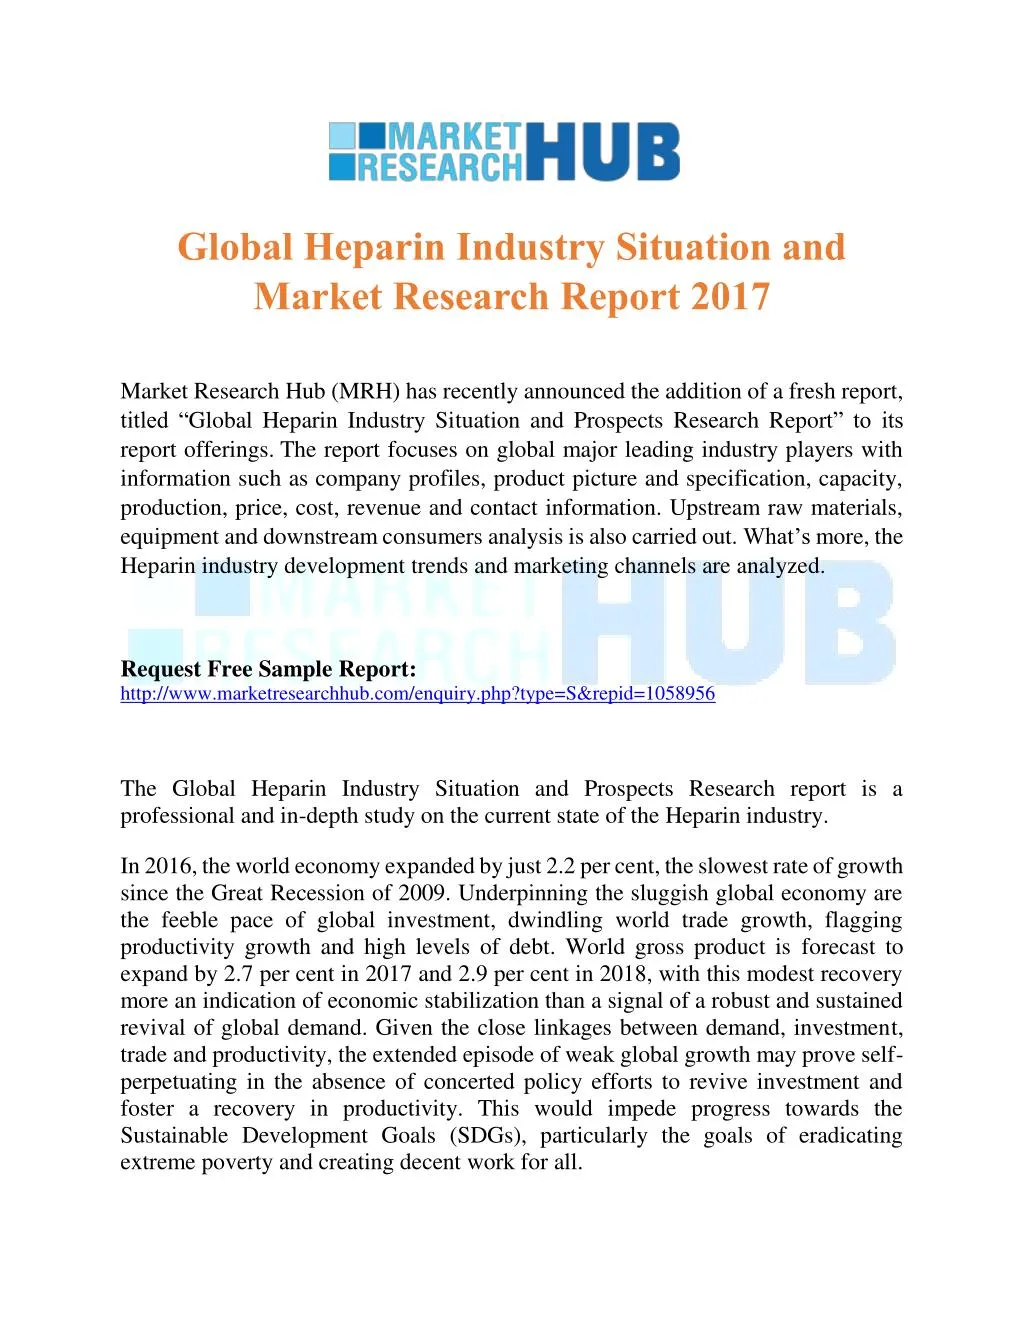 global heparin industry situation and market